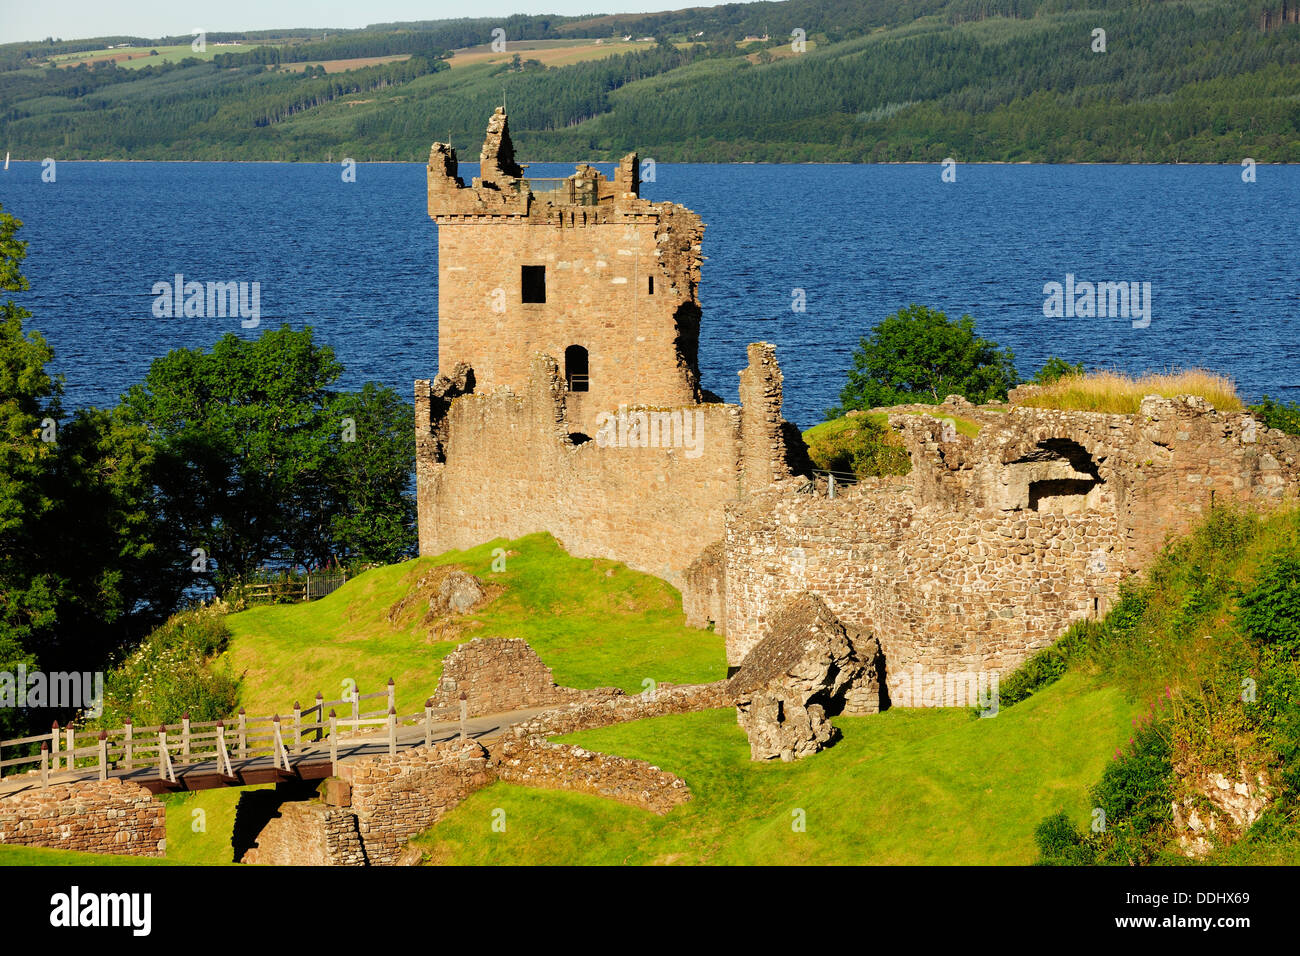 Ruined castle, Grant Tower and walls of Urquhart Castle at Loch Ness Stock Photo